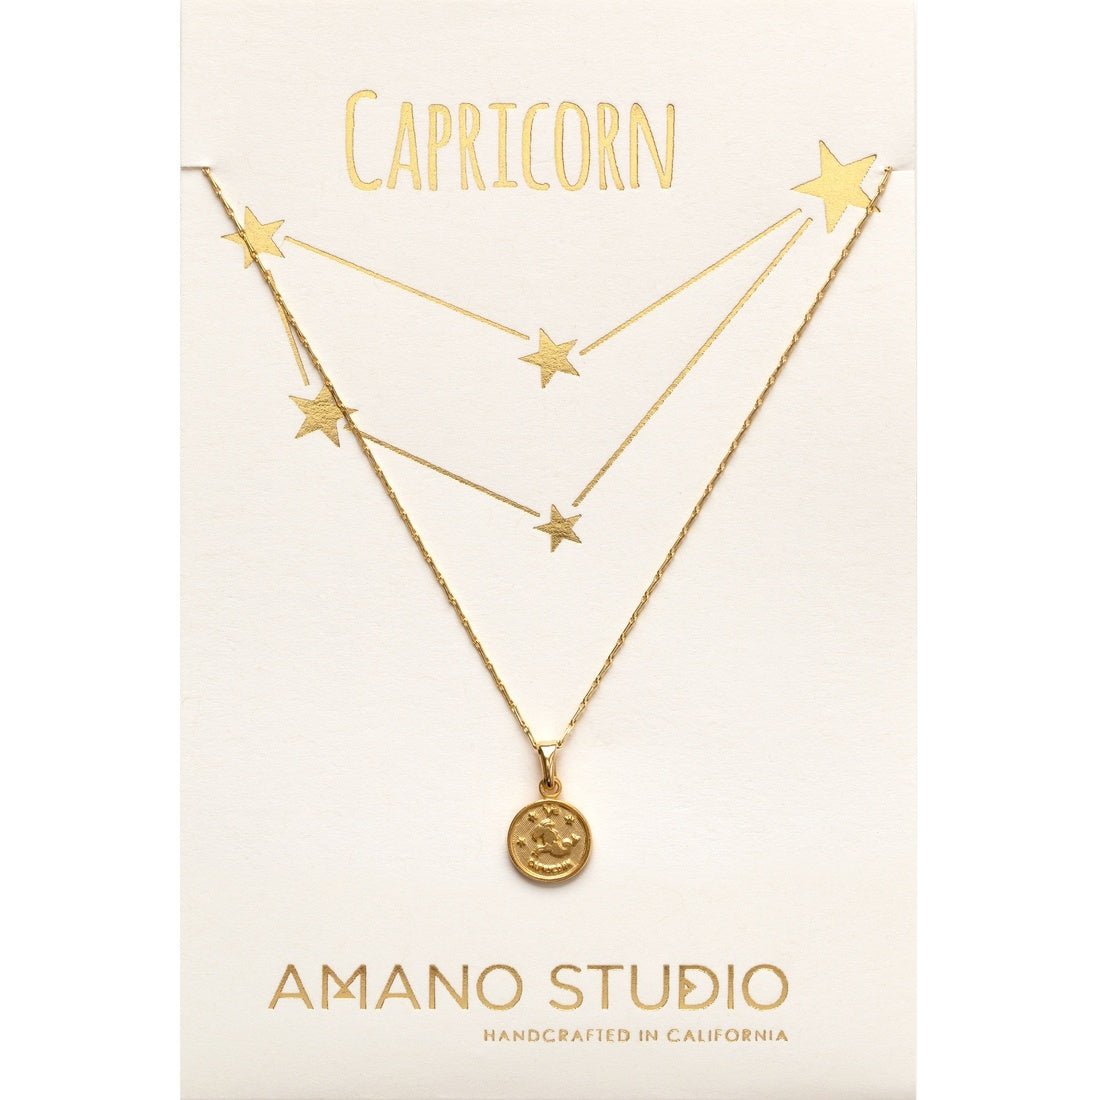 Tiny Zodiac Medallion NecklaceAdorable 1 cm diameter vintage zodiac medallions on 16" + 2" barley chain. 4k gold over brass. Carded on 100% recycled paper, letter pressed gold foil. Designed and assembled in Sonoma California. 100% made in the USA.Tiny Zo